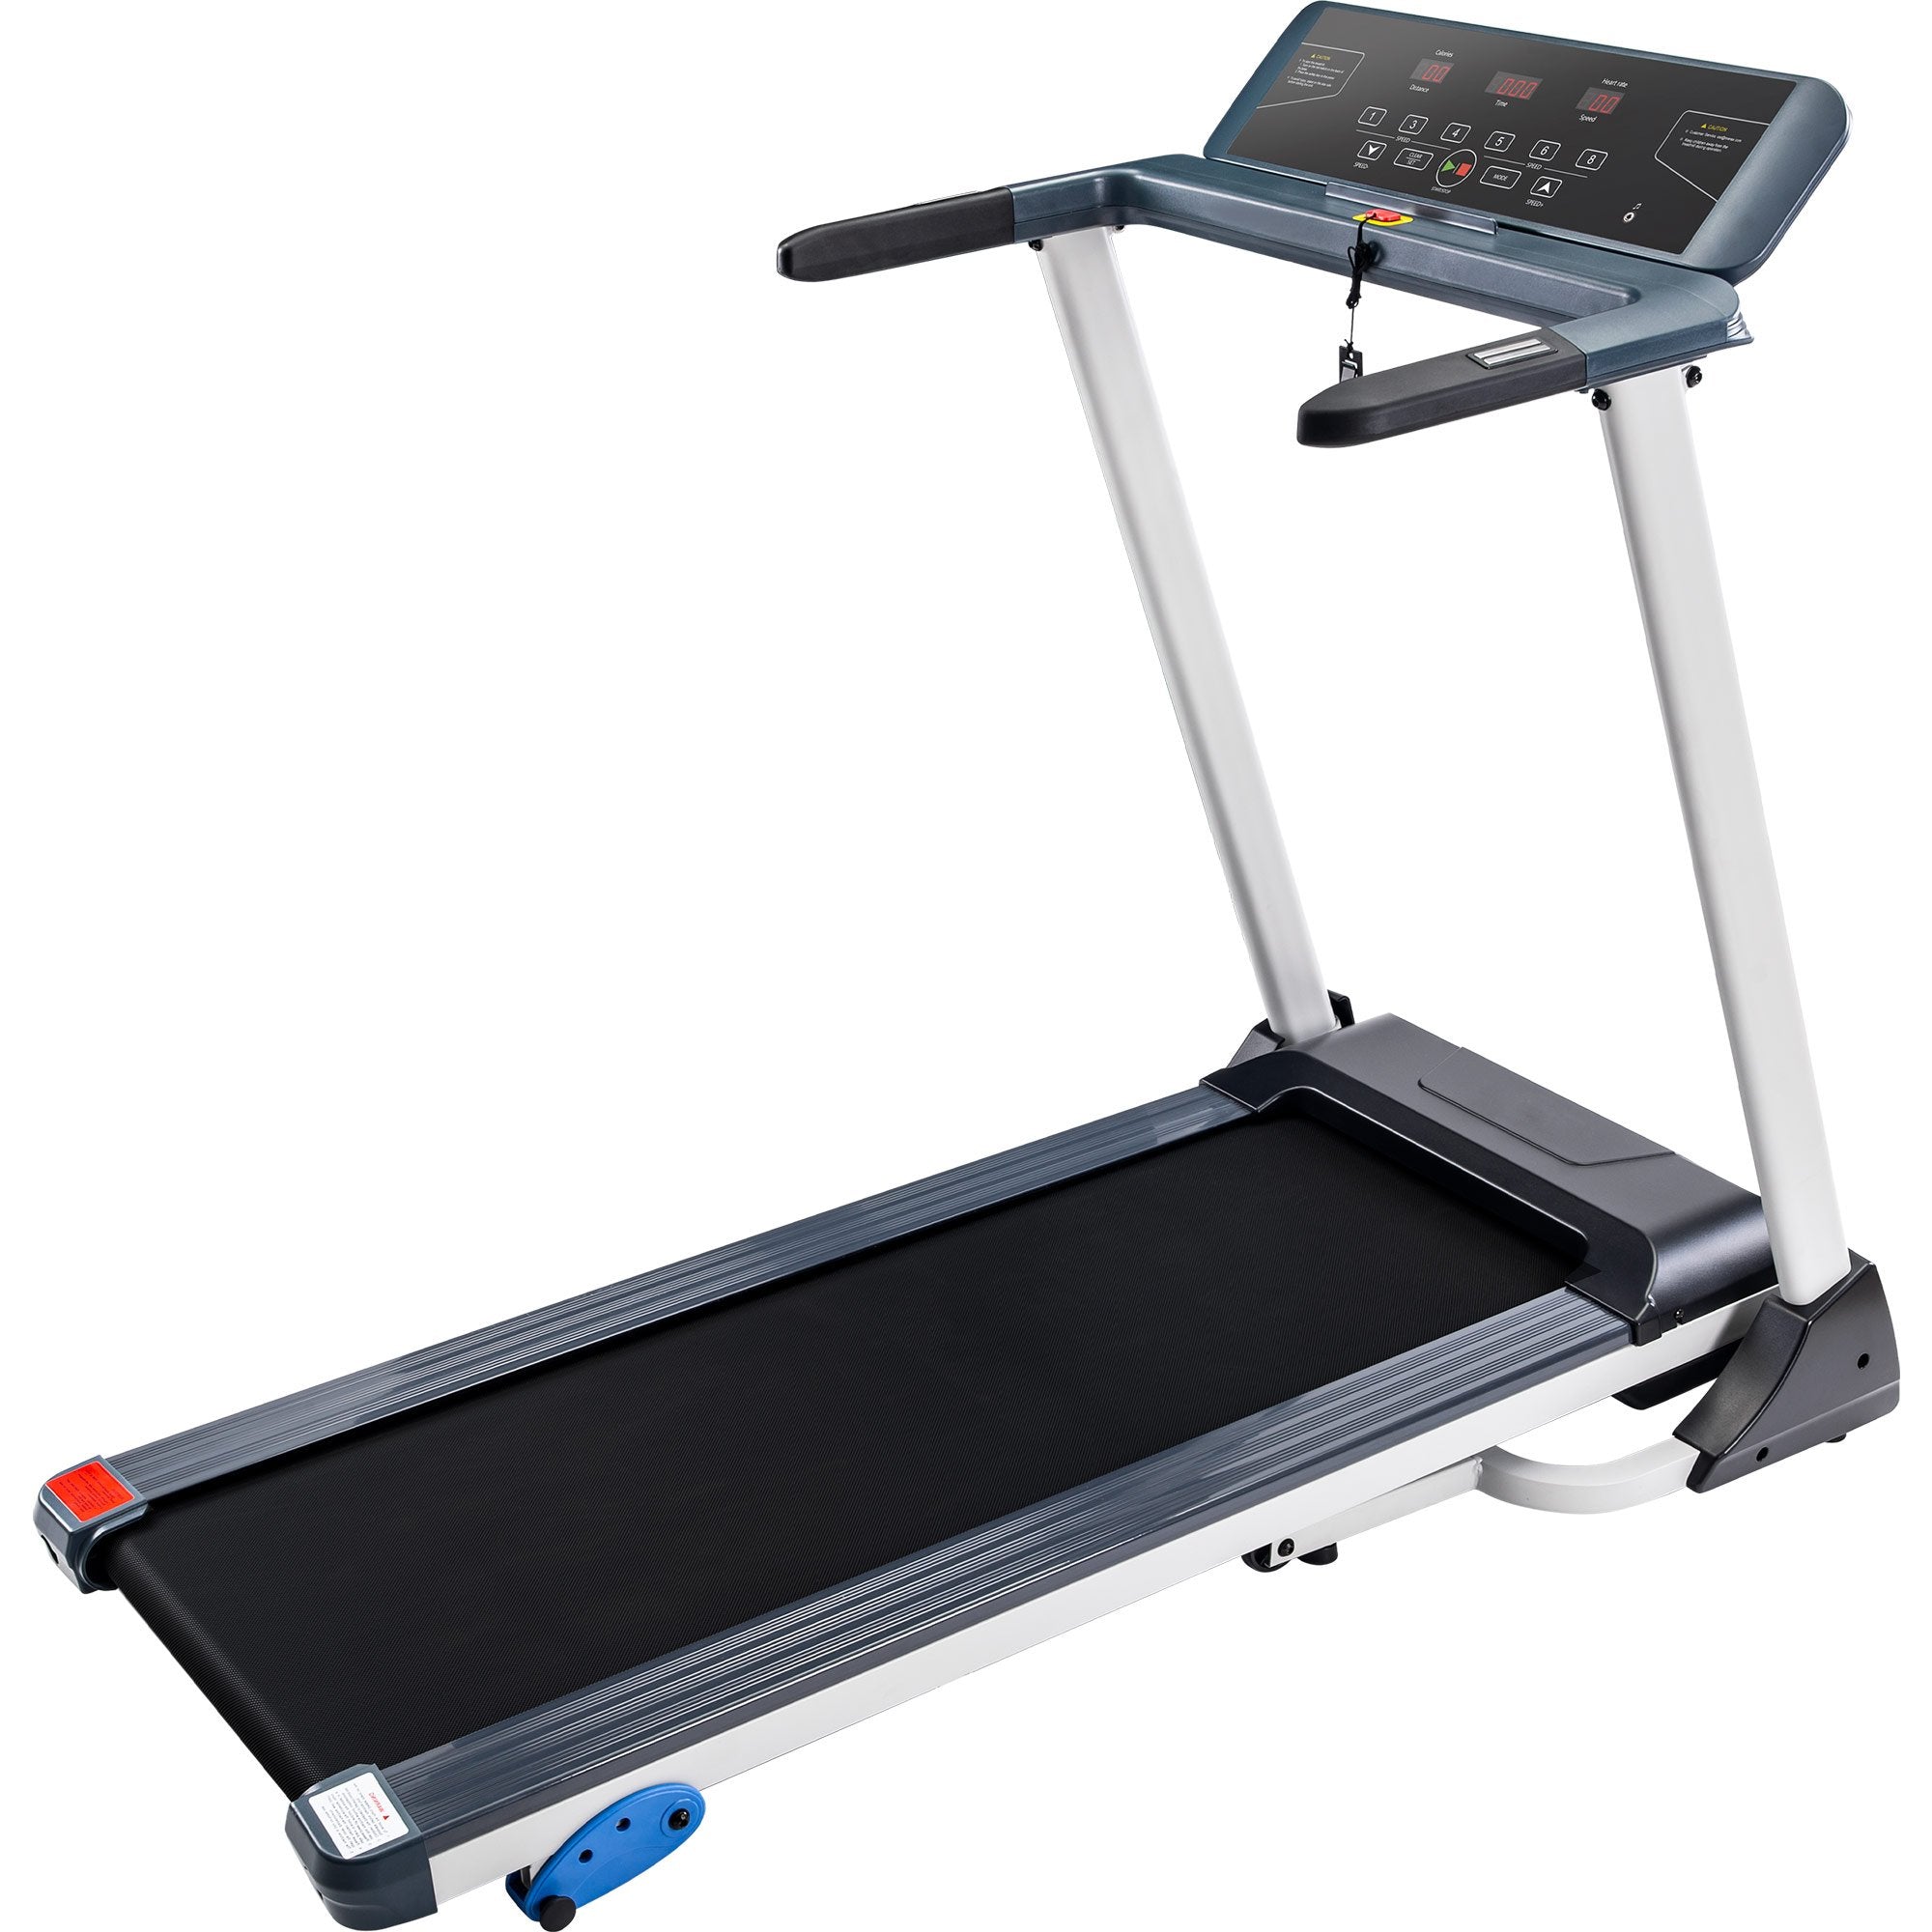 Folding Treadmill Electric Motorized Running Machine with Bluetooth, Speakers and 3 Incline Options